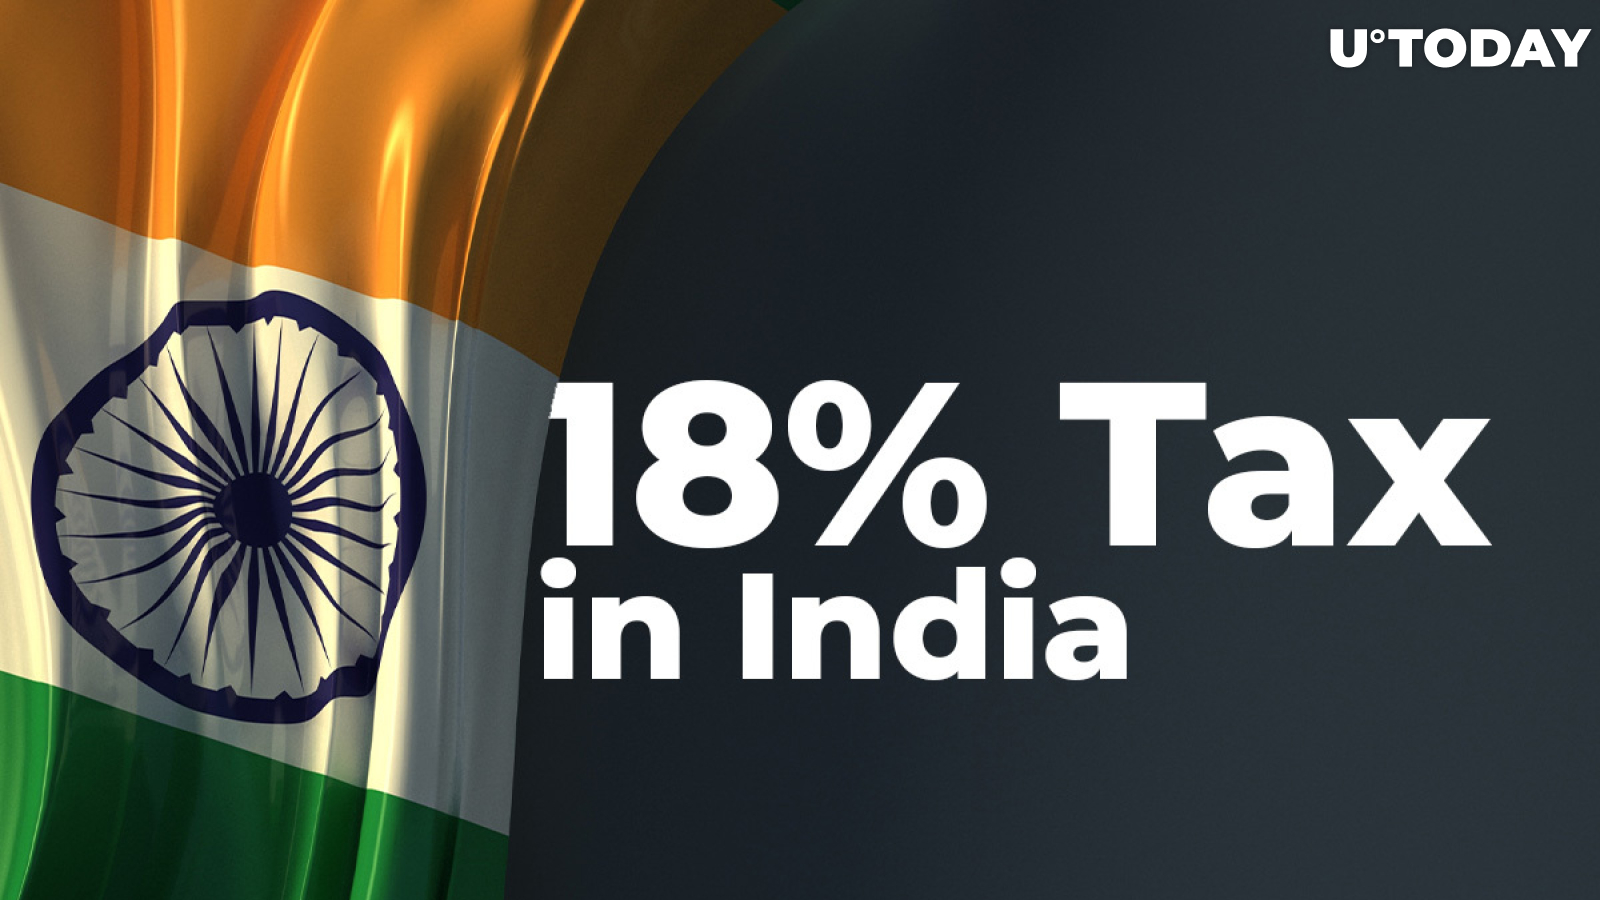 Foreign Crypto Exchanges May Have to Pay 18 Percent Tax in India